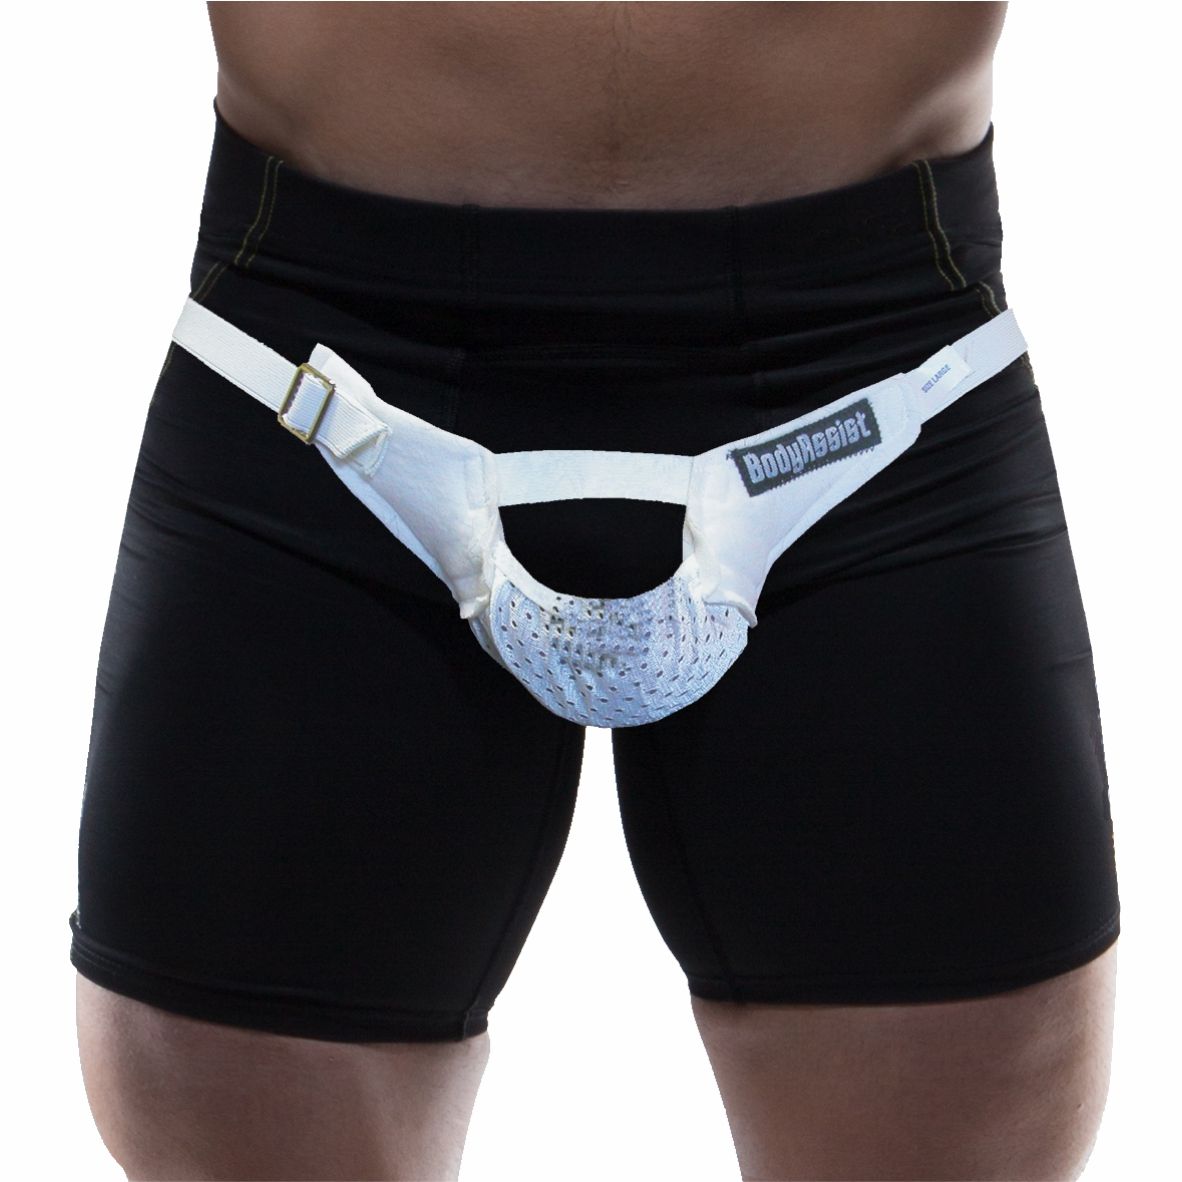 Suspensory Scrotal Support (XXX-Large)